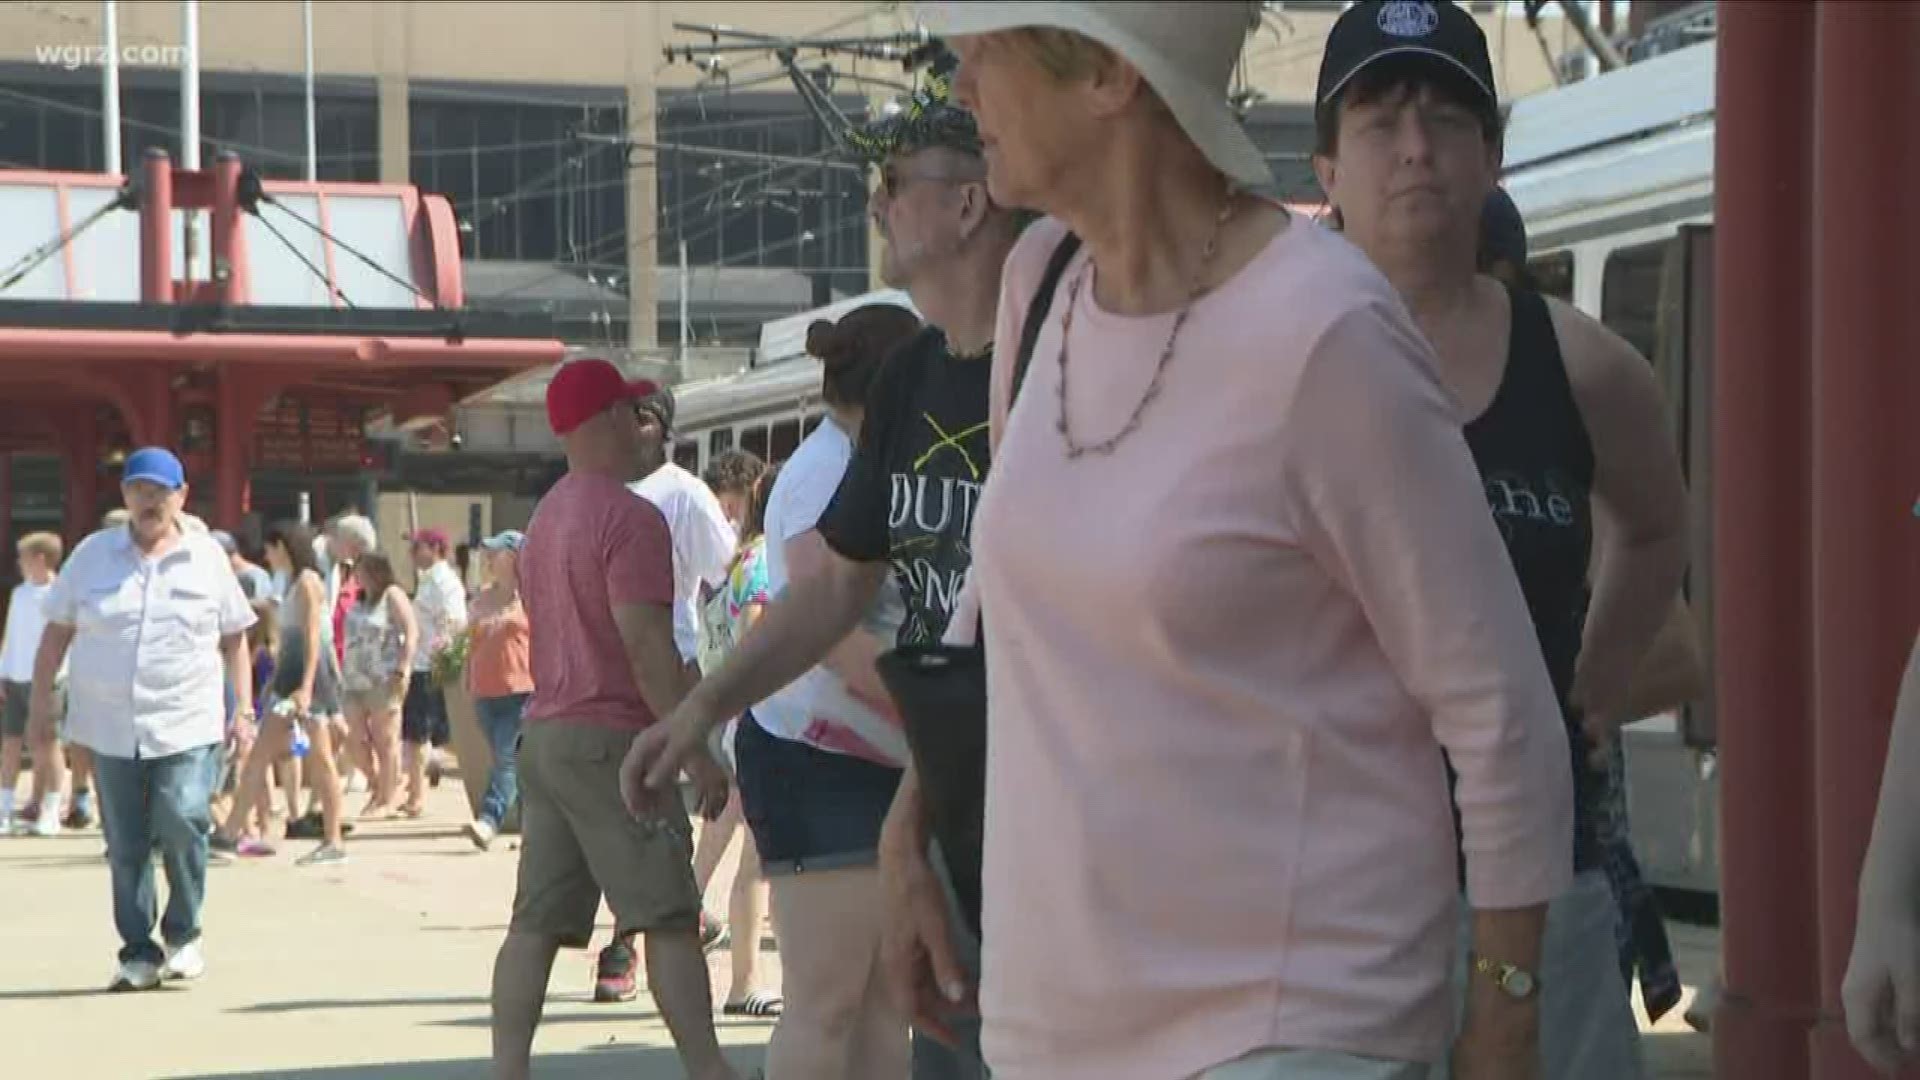 Long lines, confusion, and the heat made for a difficult  day to see the Tall ships today.